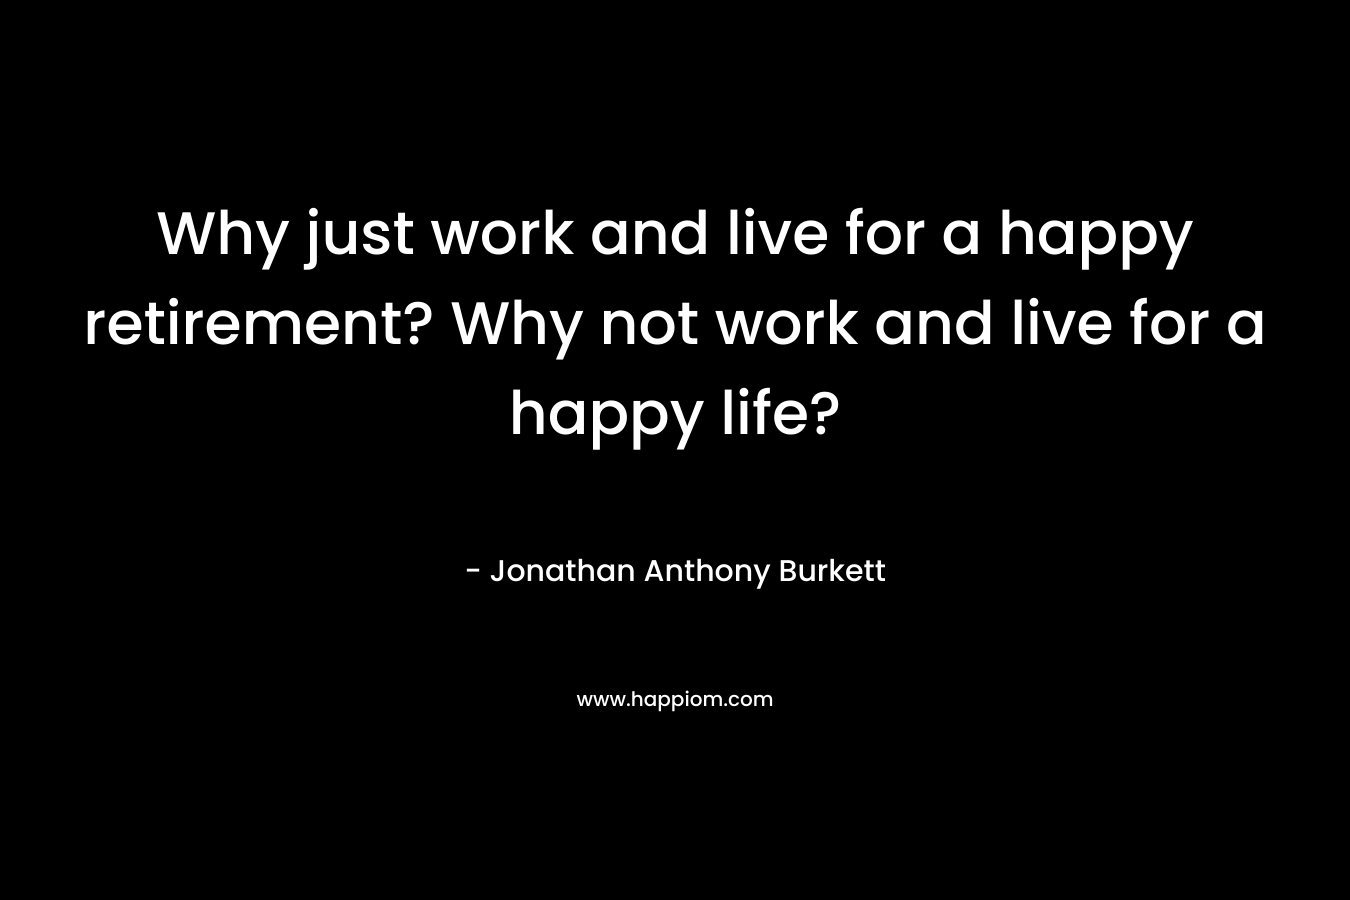 Why just work and live for a happy retirement? Why not work and live for a happy life?